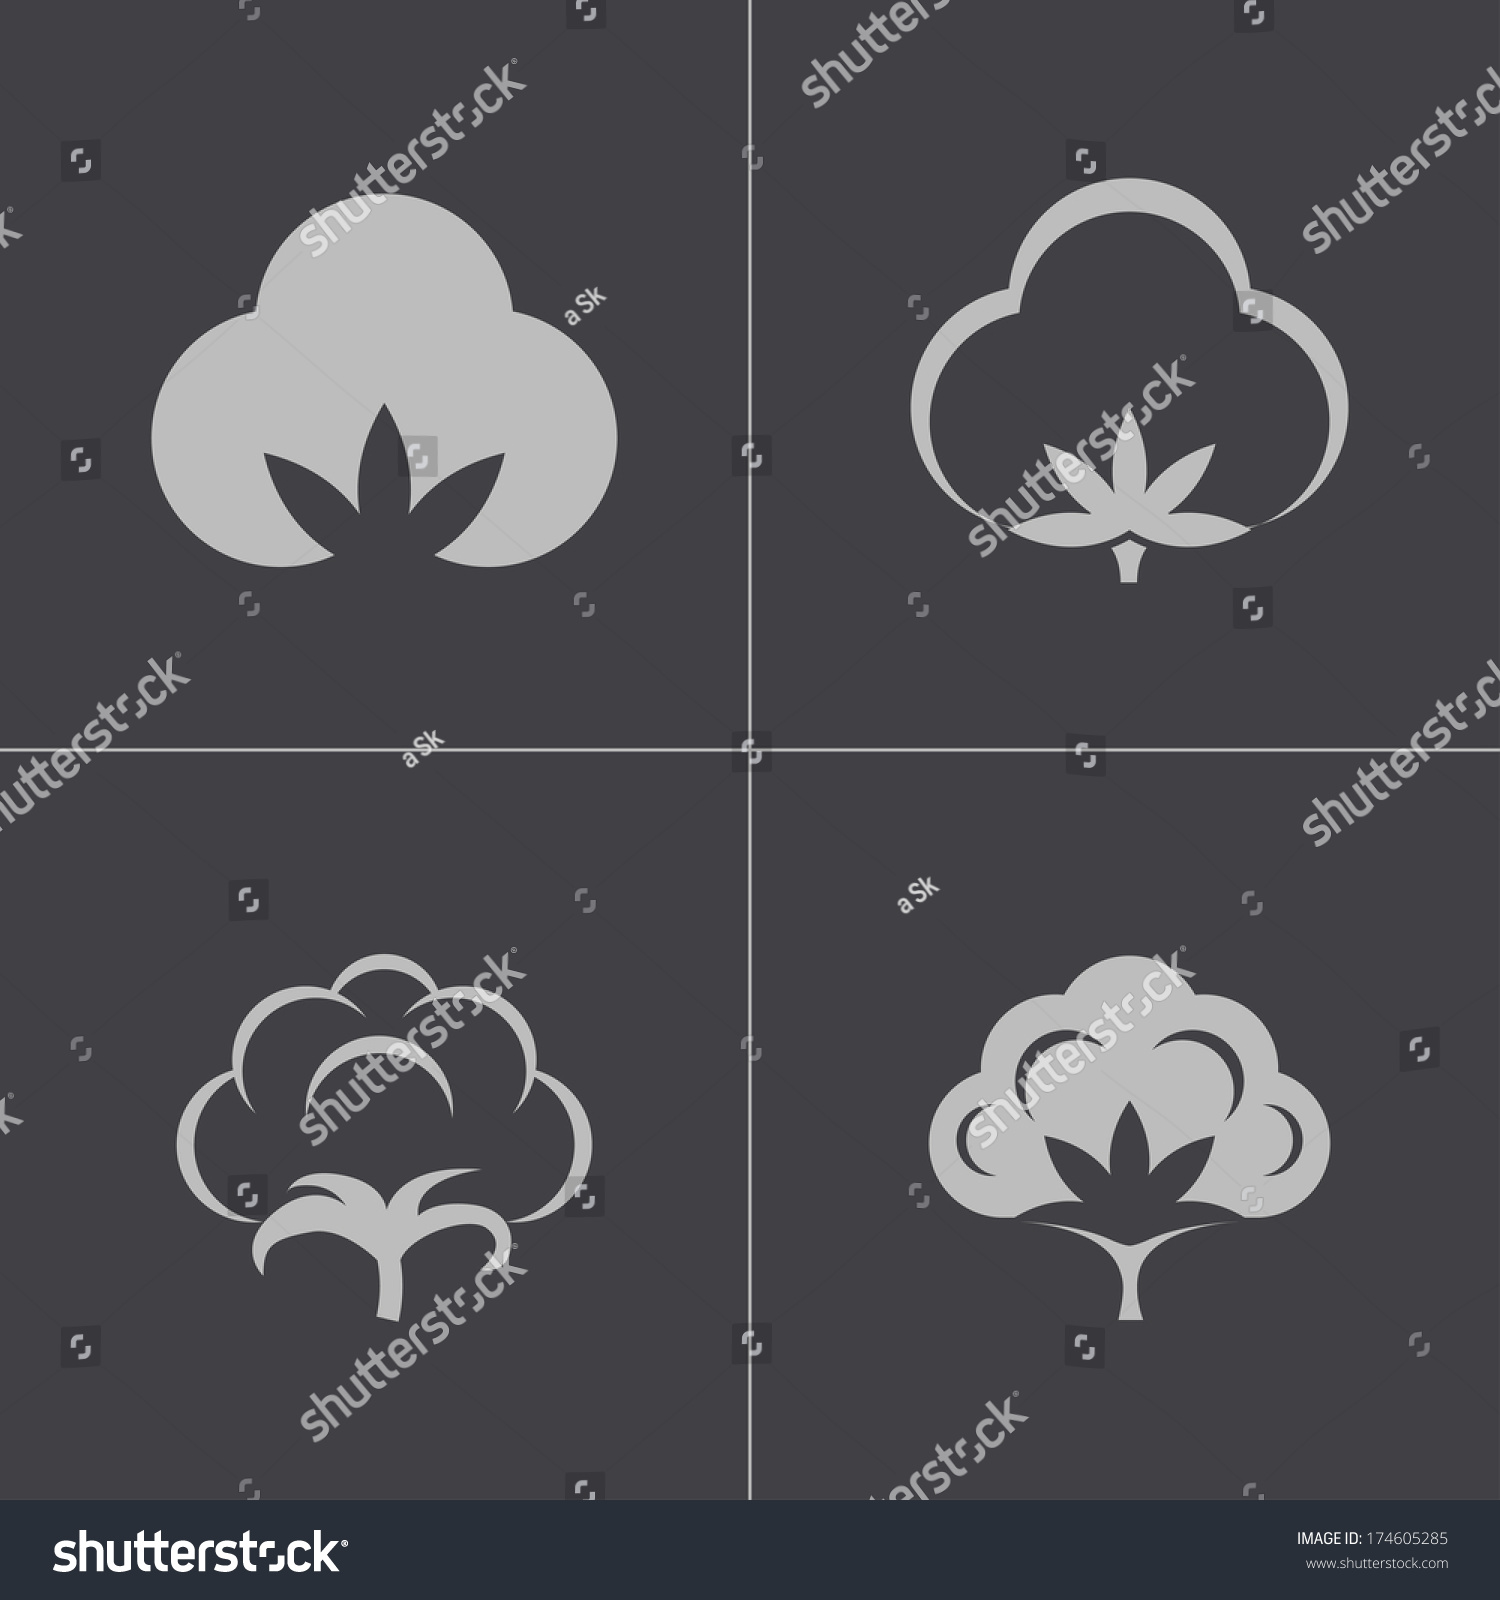 Vector Black Cotton Icons Set On Gray Background - 174605285 : Shutterstock